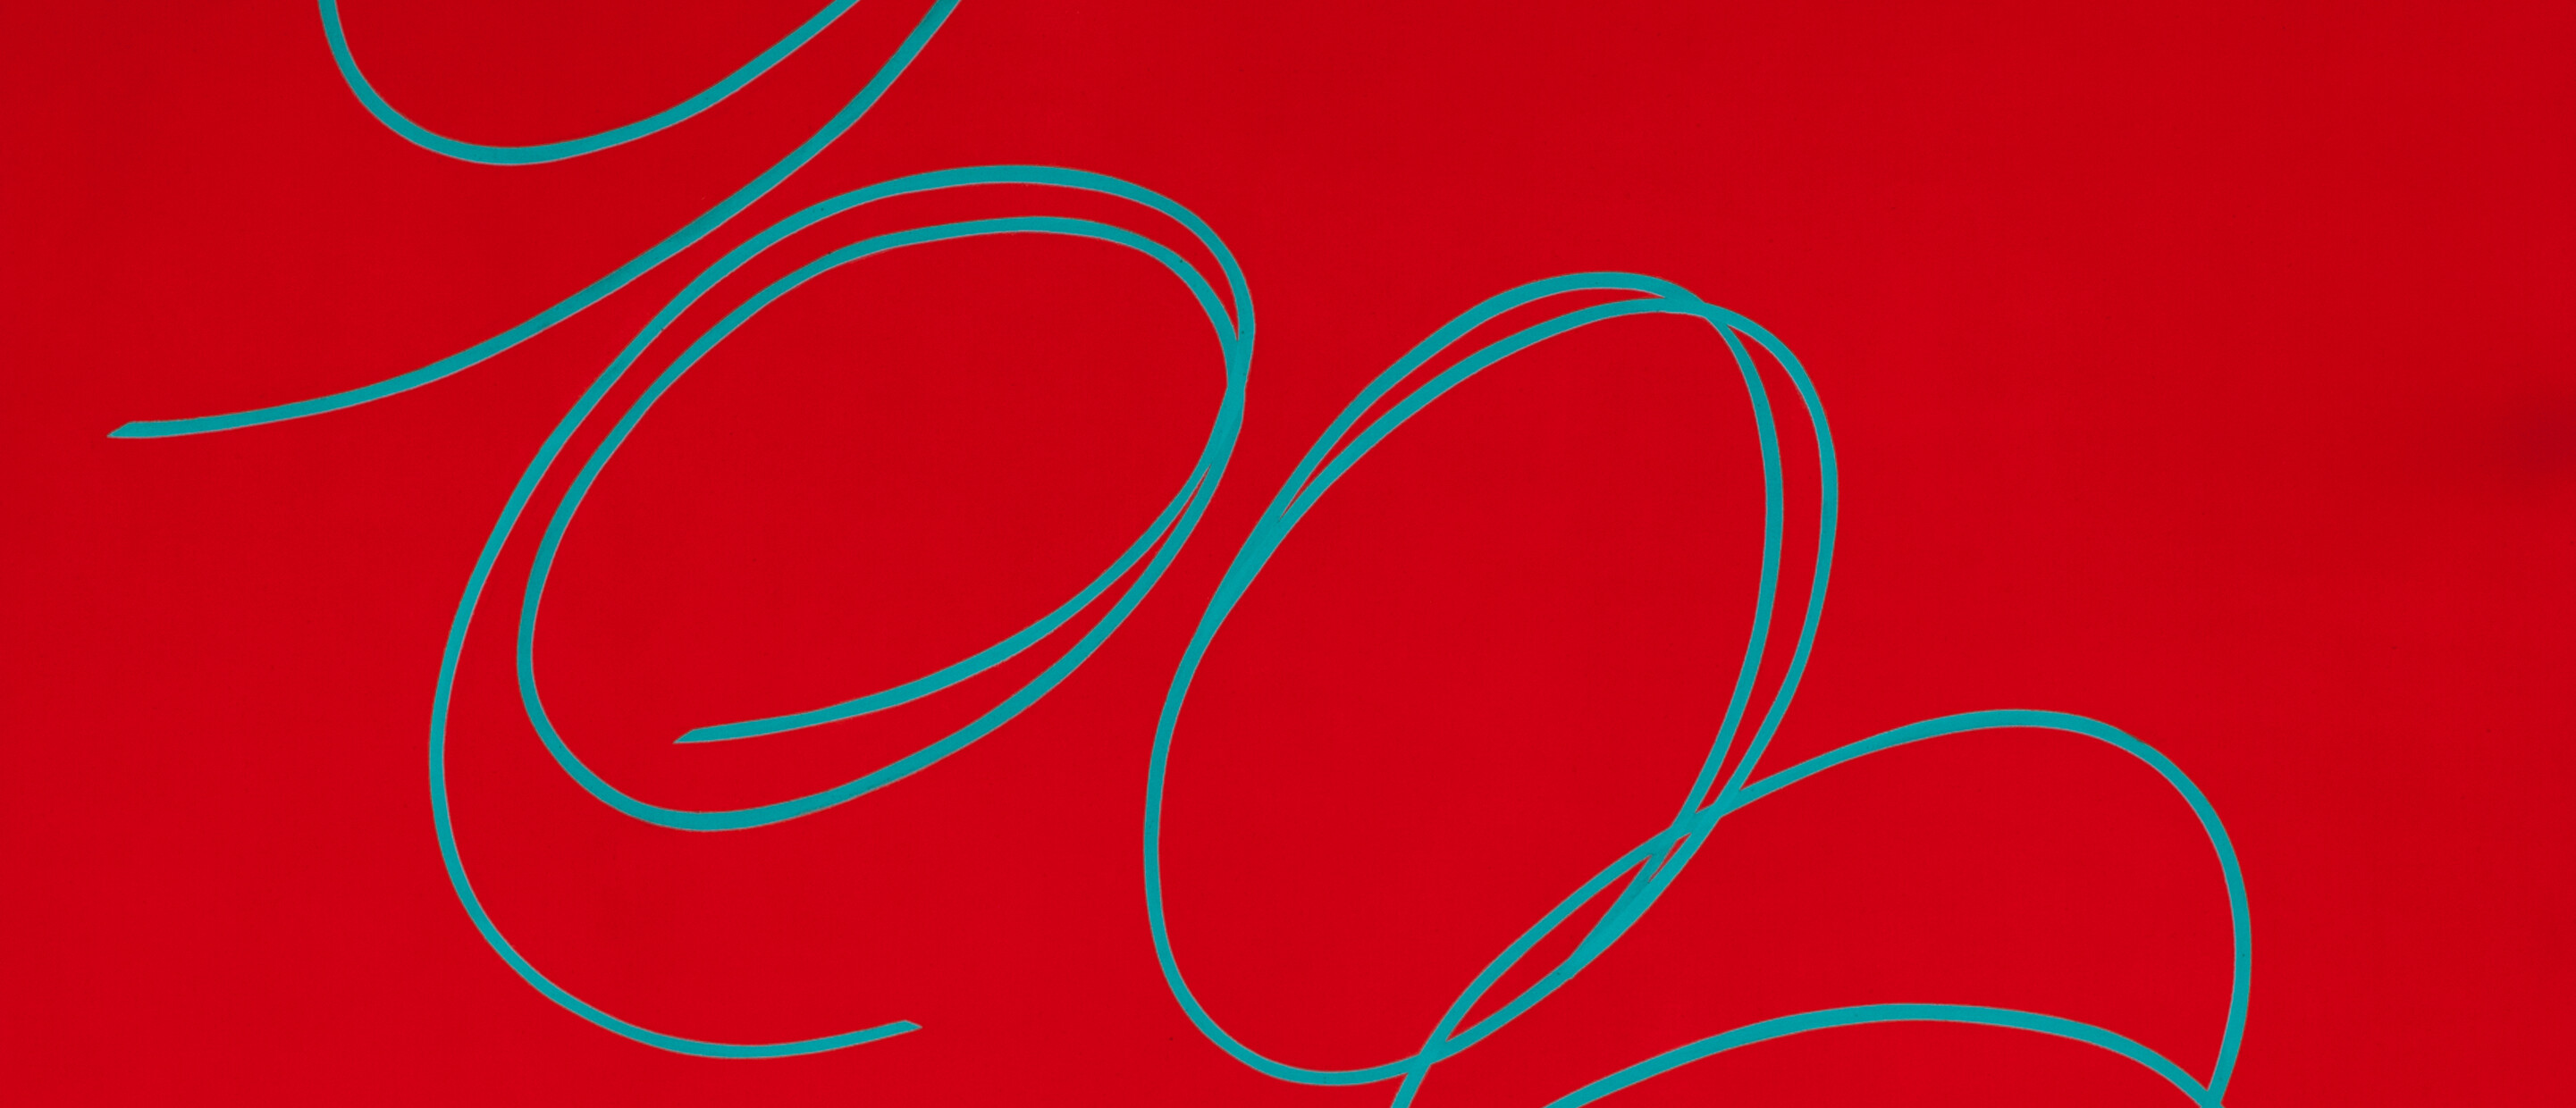 red painting with blue loops